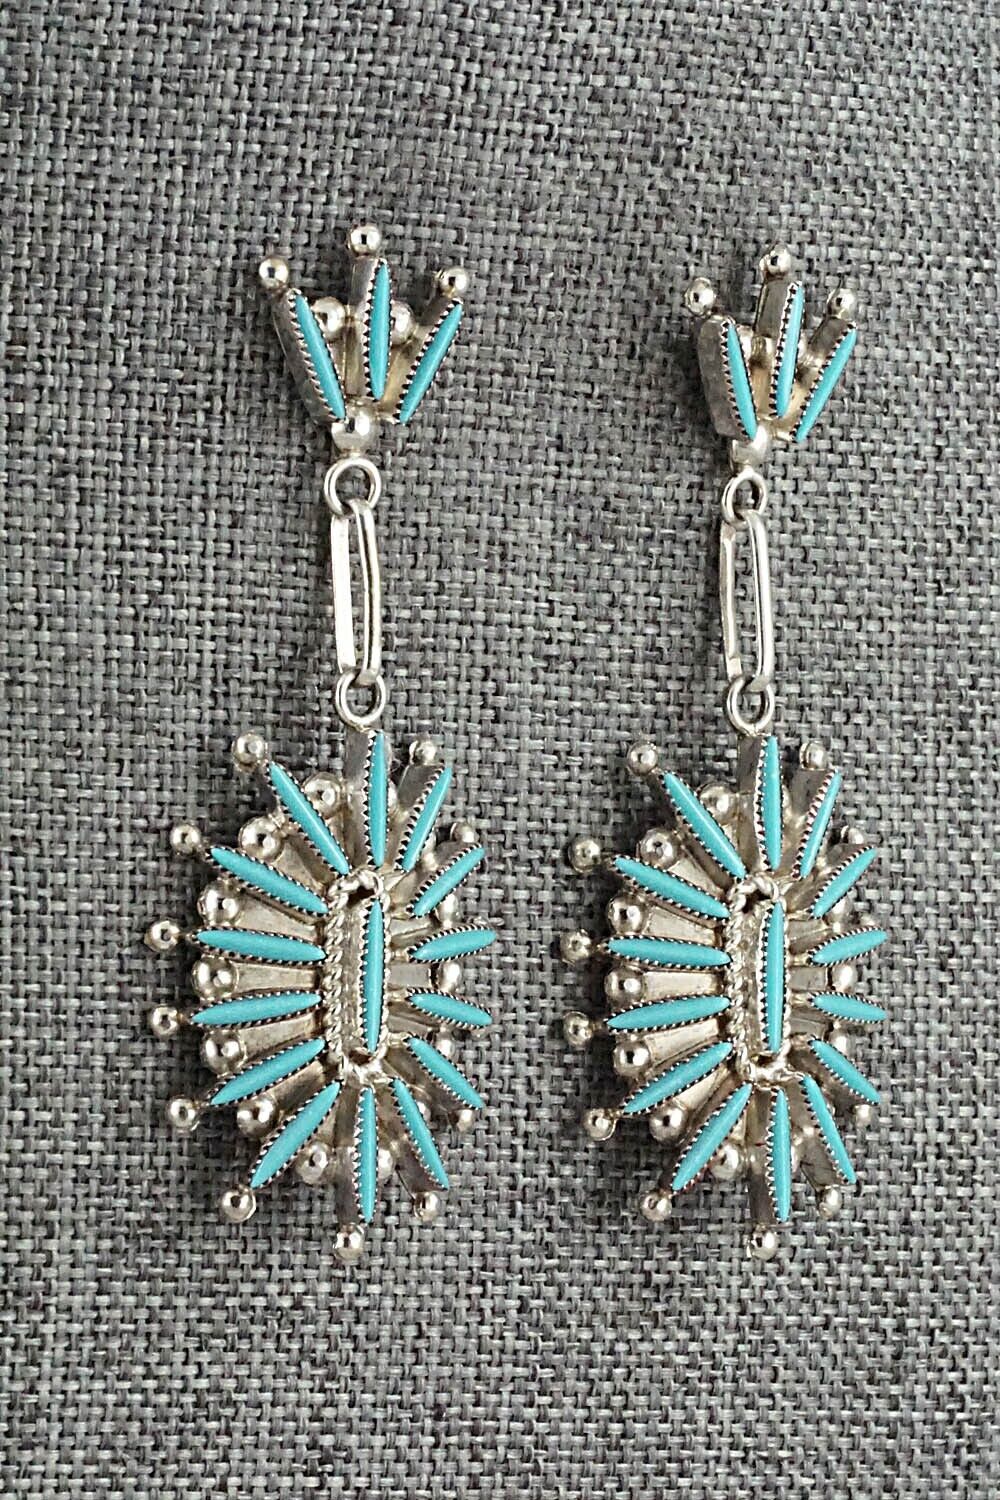 Turquoise & Sterling Silver Earrings - Colin Lalio